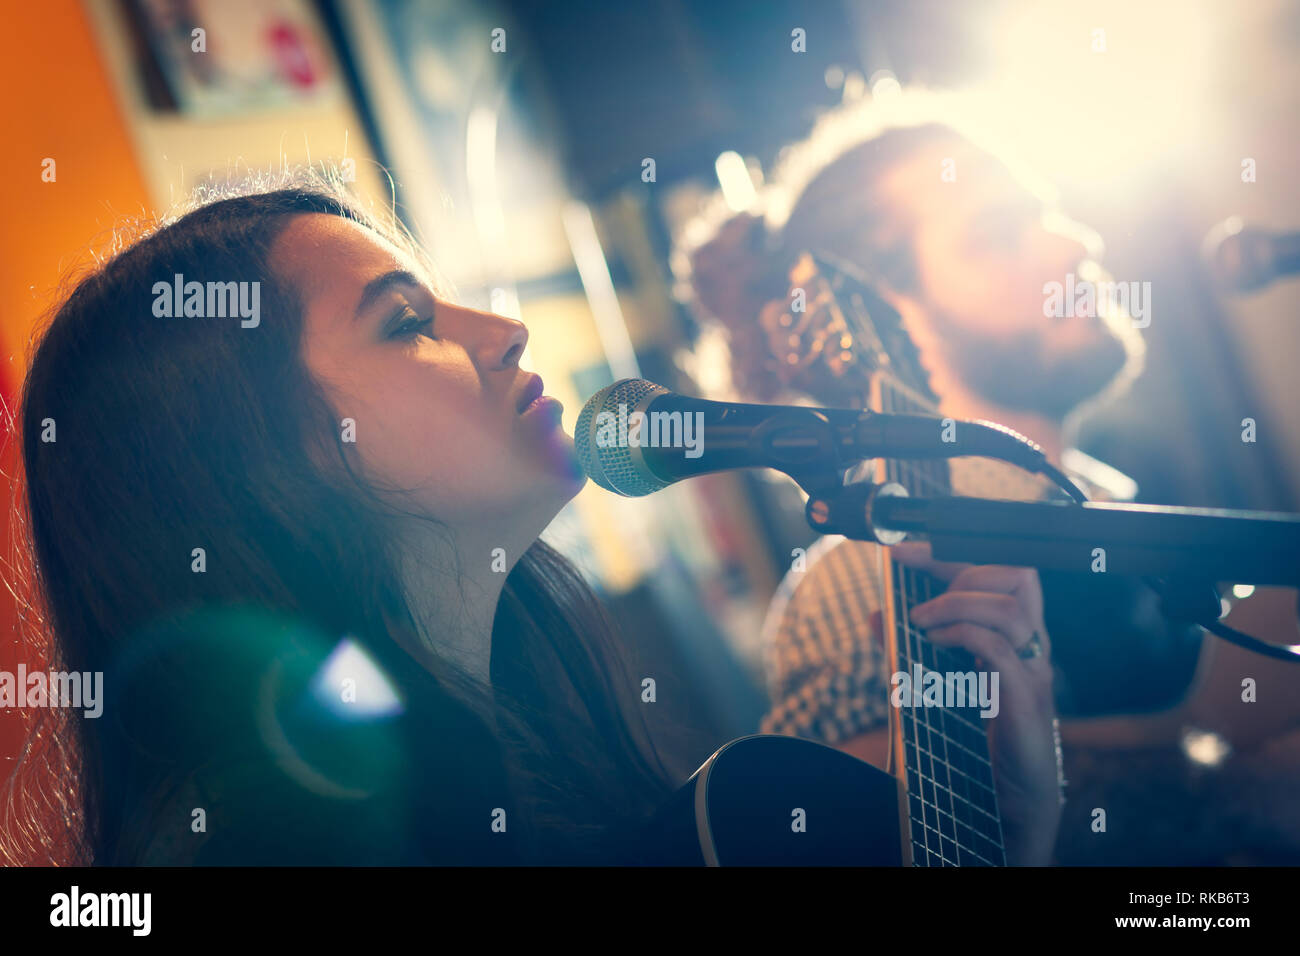 Duet of guitarists singing during a musical performance. Backlight with flare. Stock Photo